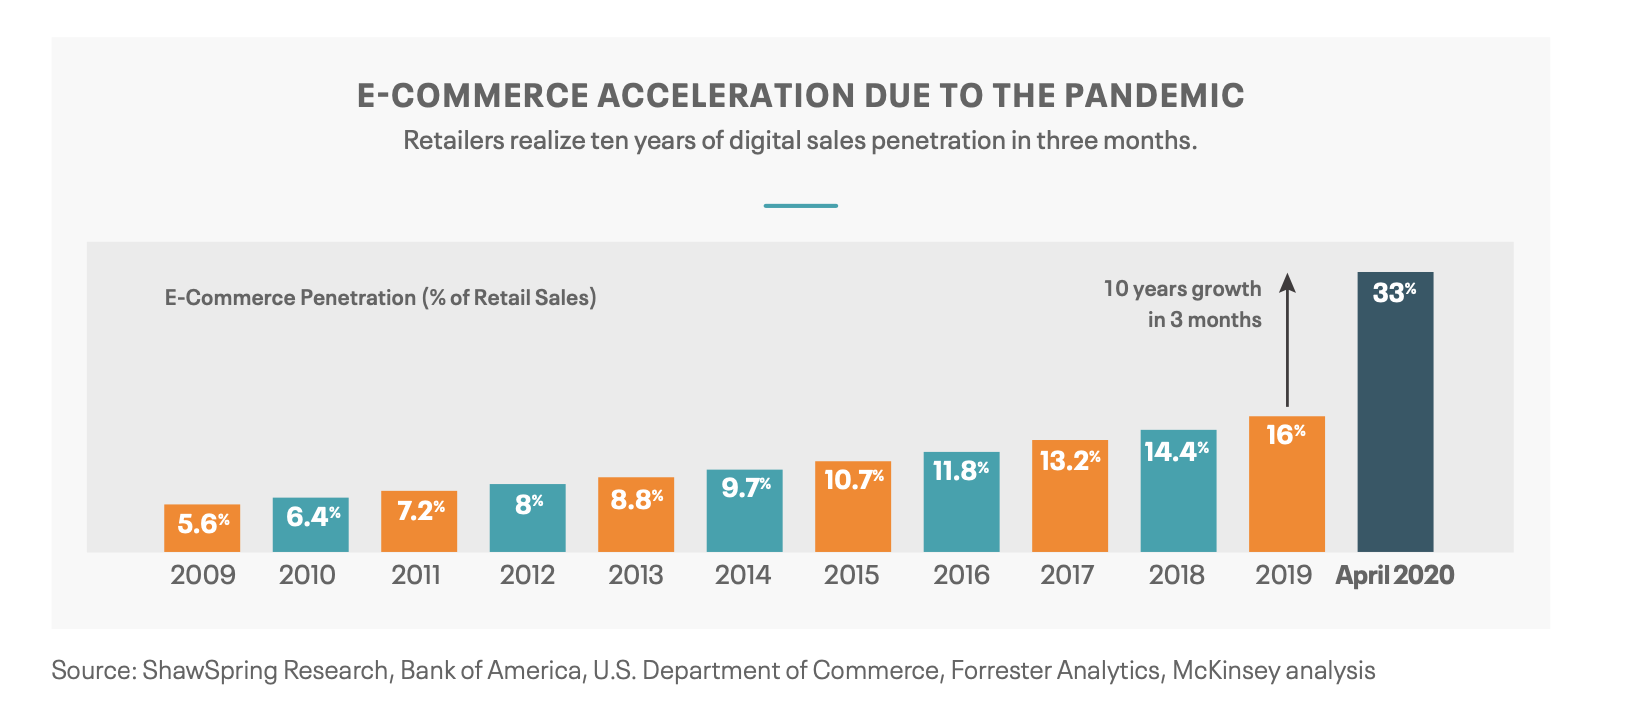 e-commerce acceleration due to pandemic